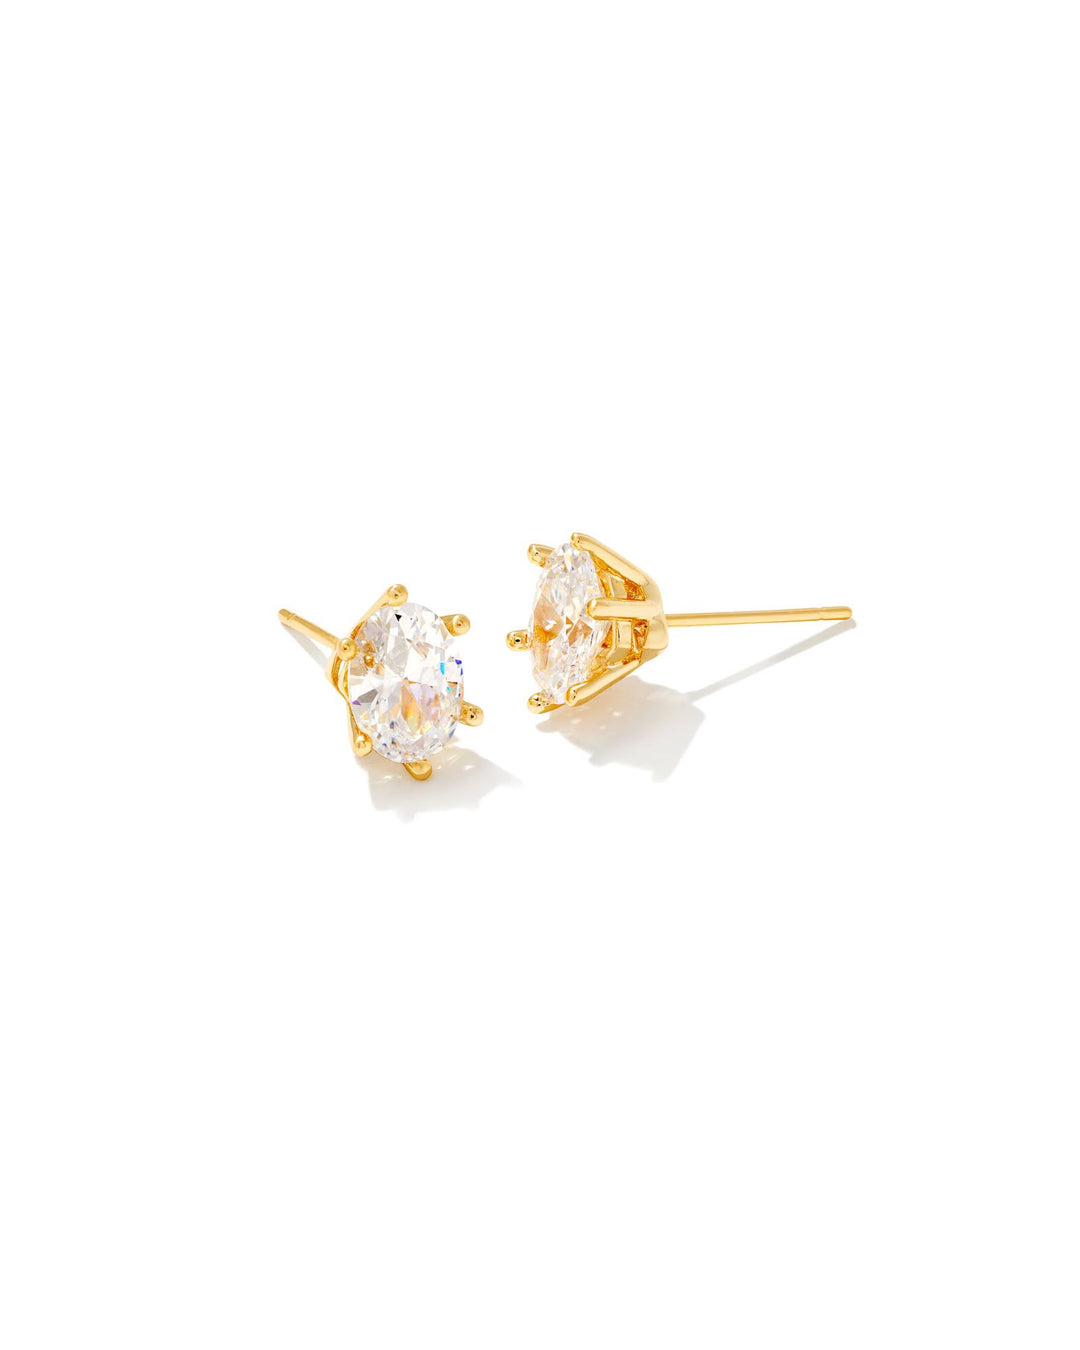 CAILIN CRYSTAL STUD EARRINGS, GOLD METAL WHITE CZ